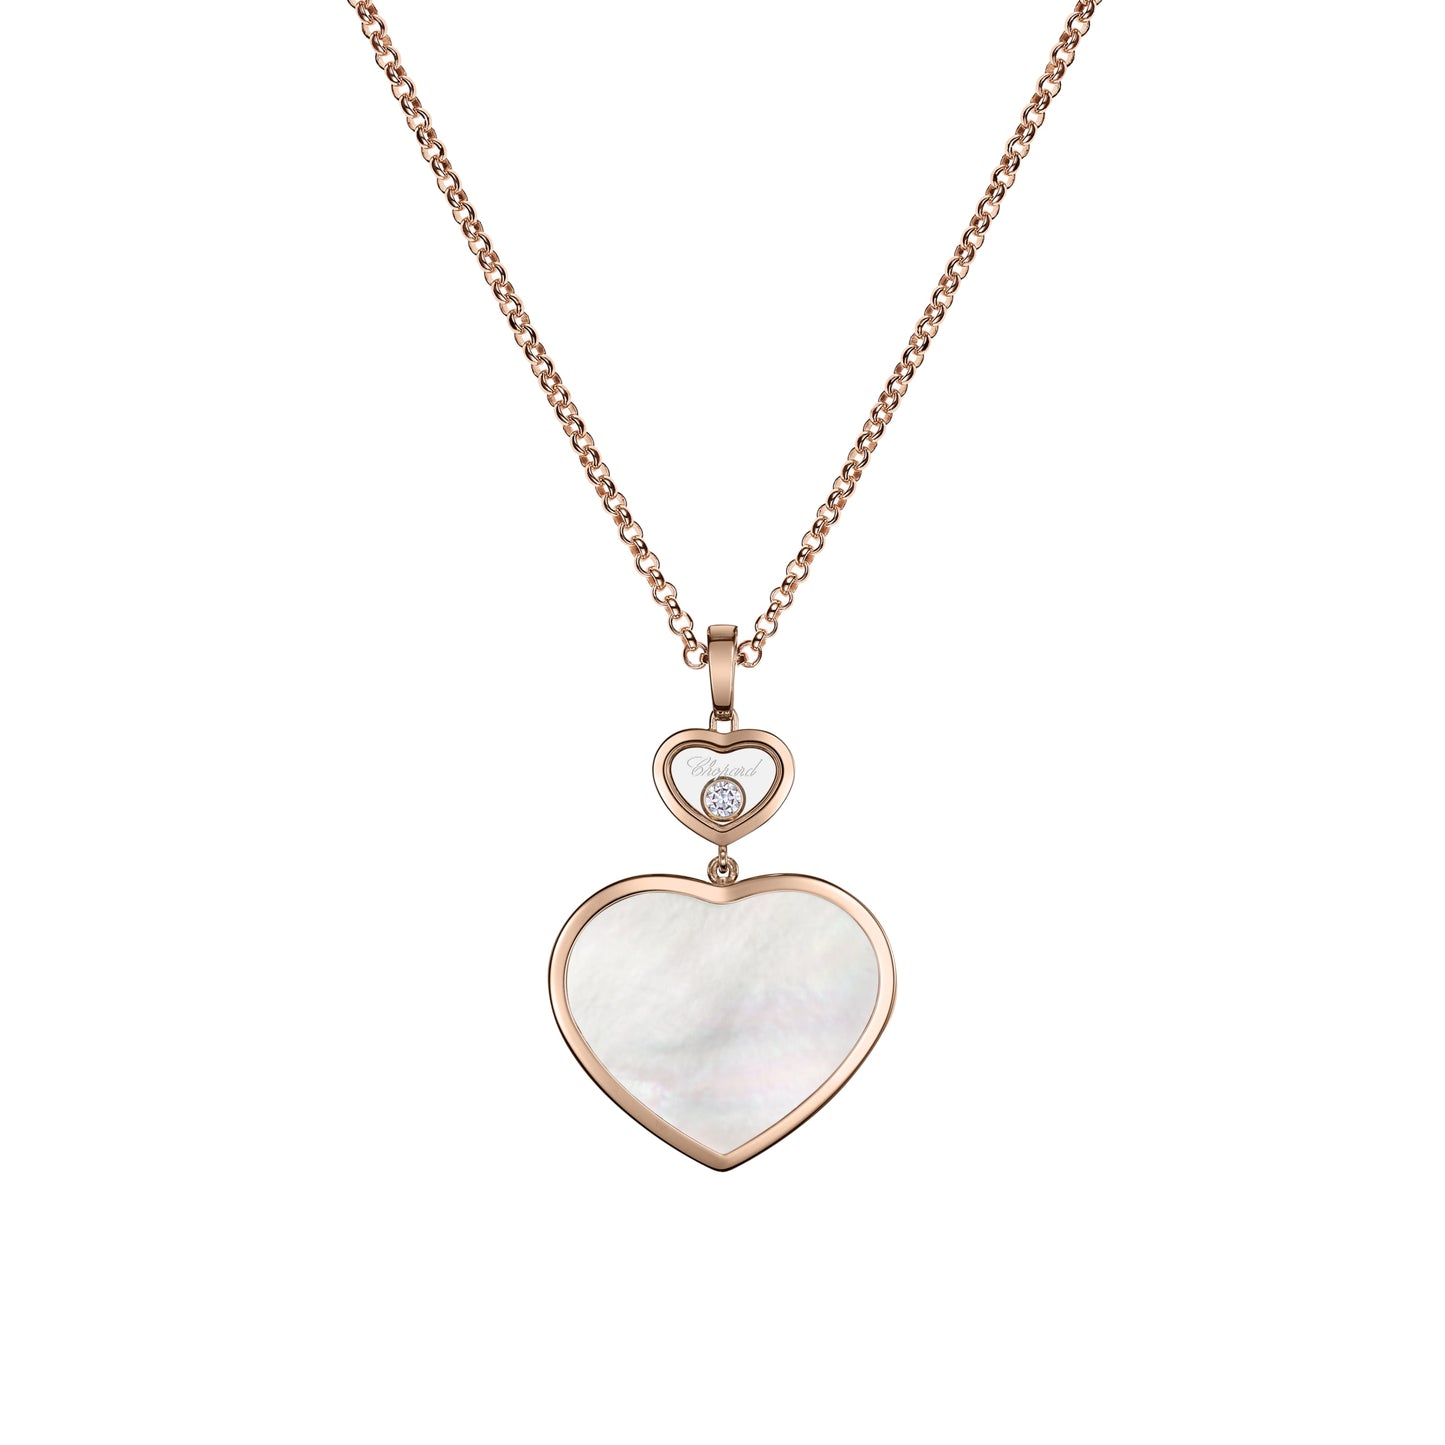 HAPPY HEARTS PENDANT, ETHICAL ROSE GOLD, DIAMOND, MOTHER-OF-PEARL 79A075-5301